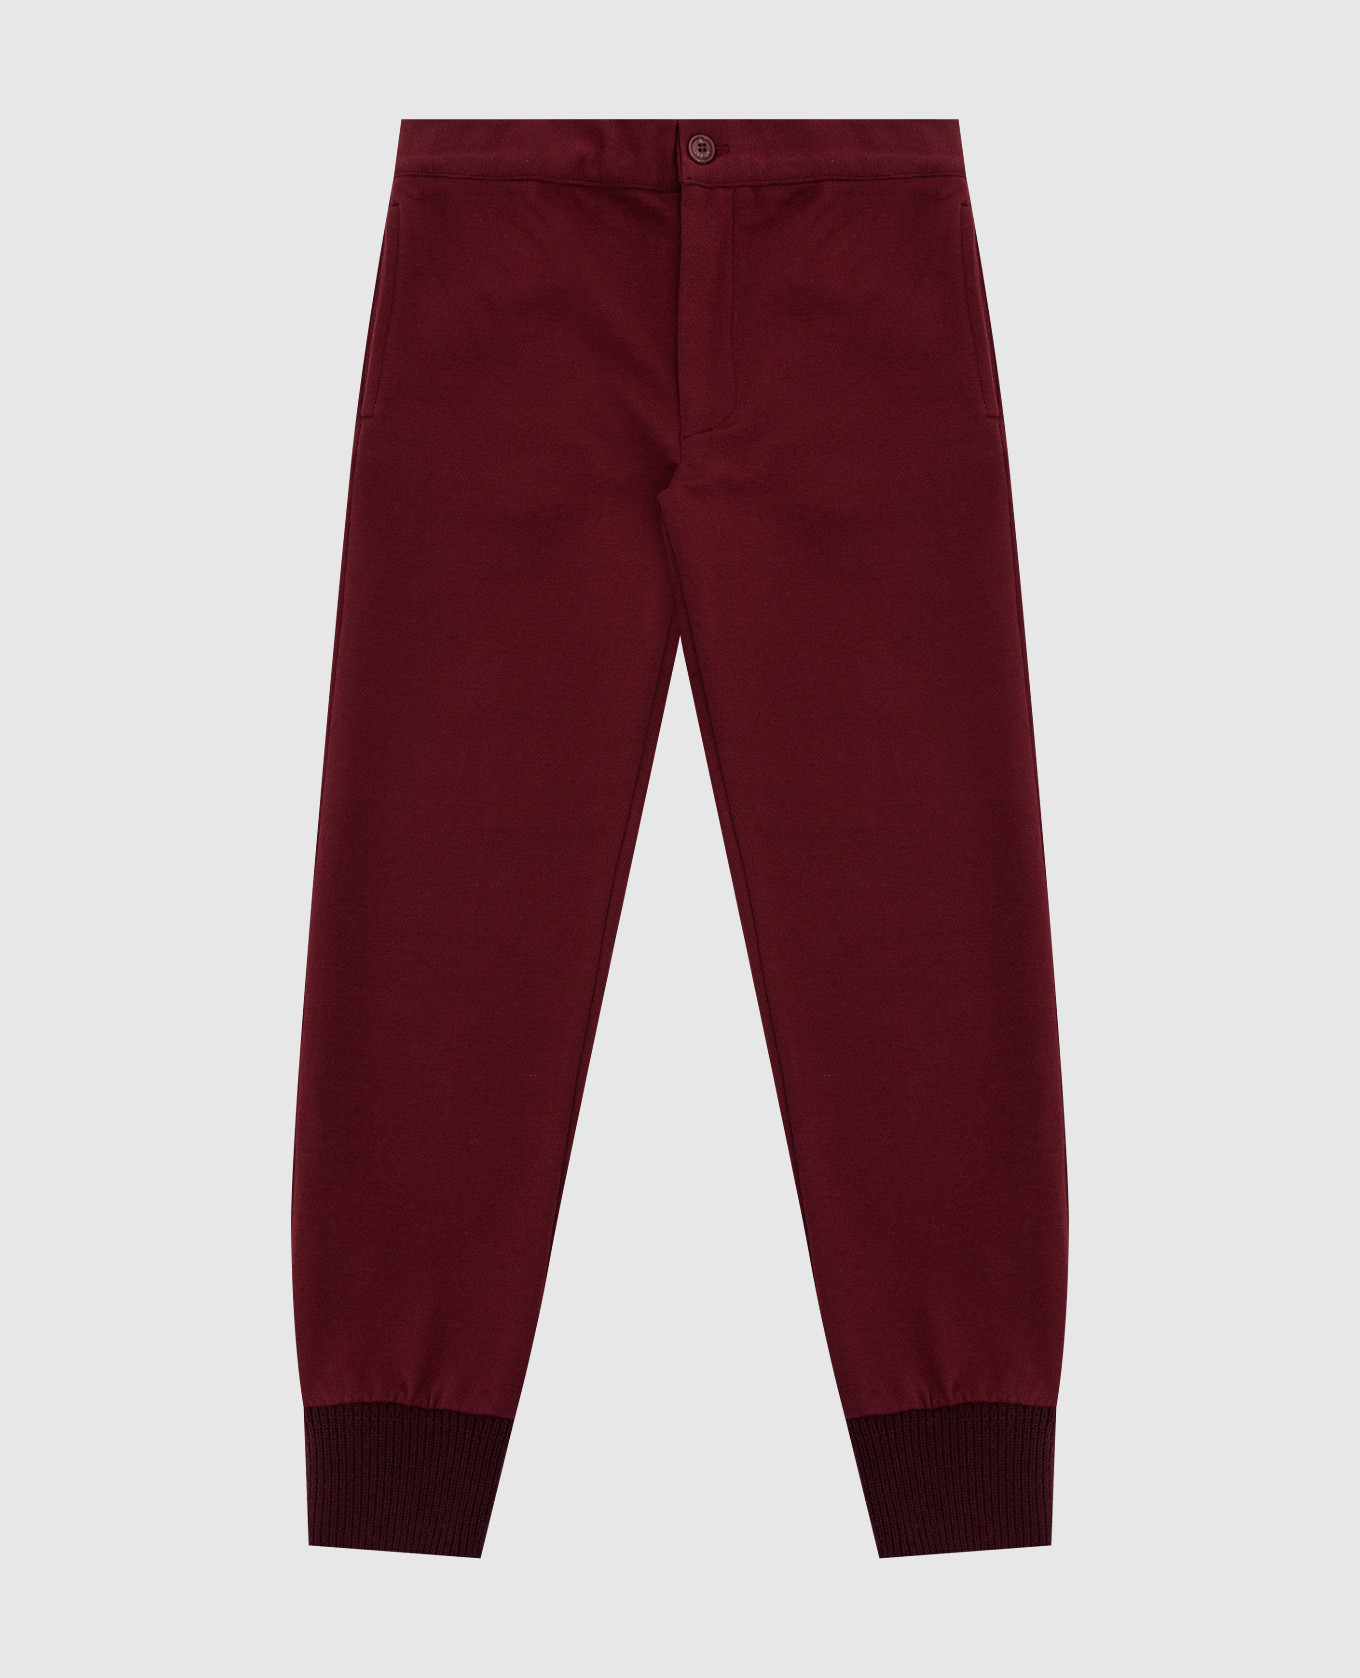 Embroidered cashmere baby joggers